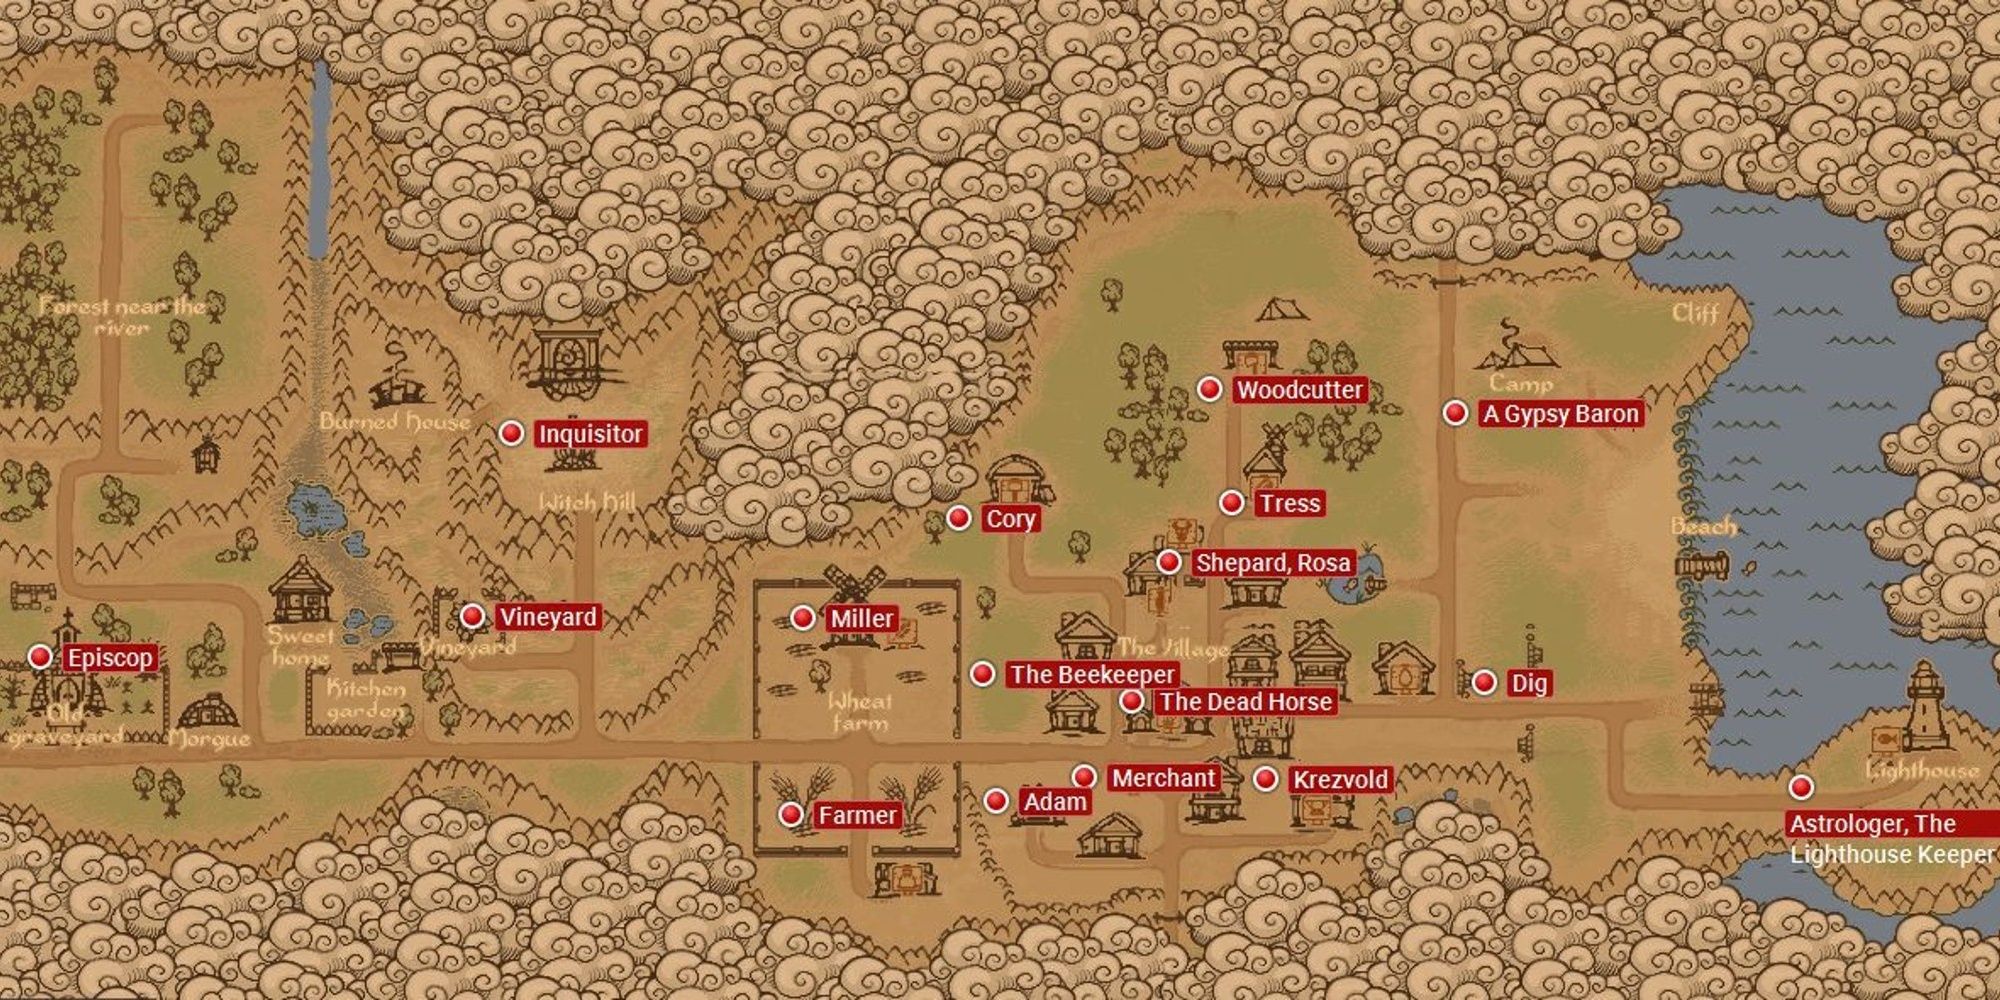 graveyard keeper map partial map with locations